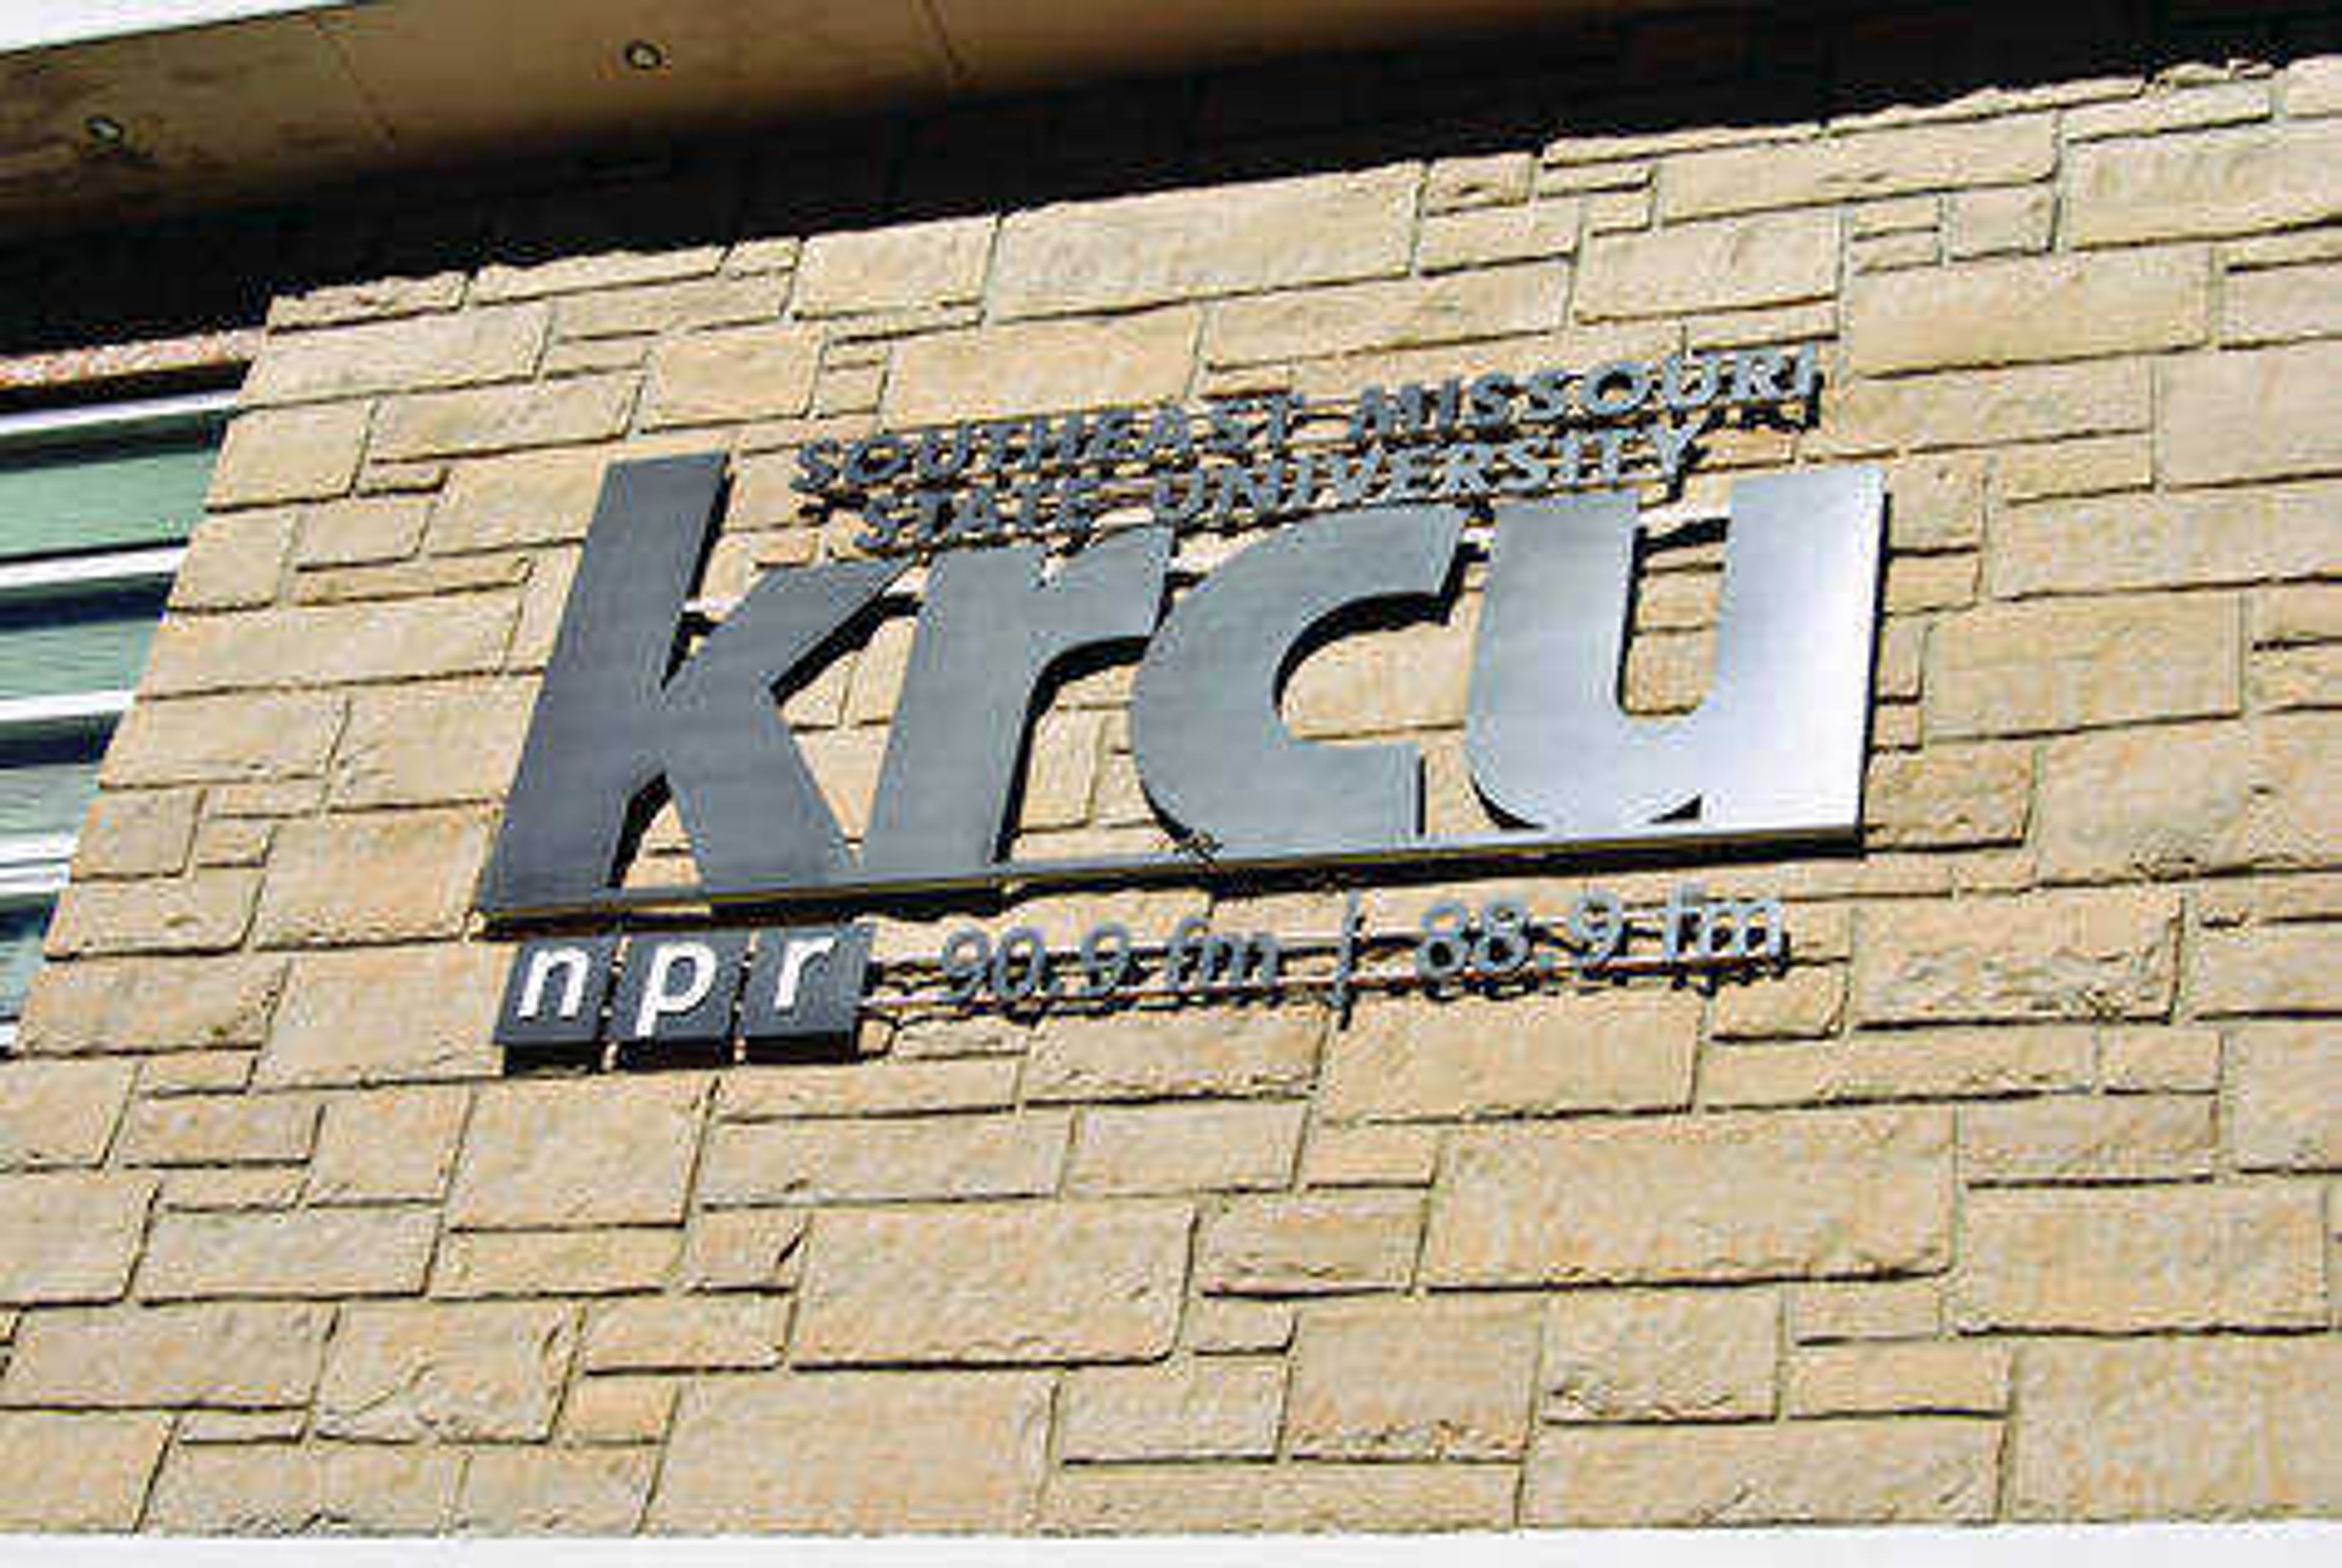 KRCU 90.9/88.9 FM is located in Serena Building on Southeast Missouri State University's campus. Photo by J.C. Reeves